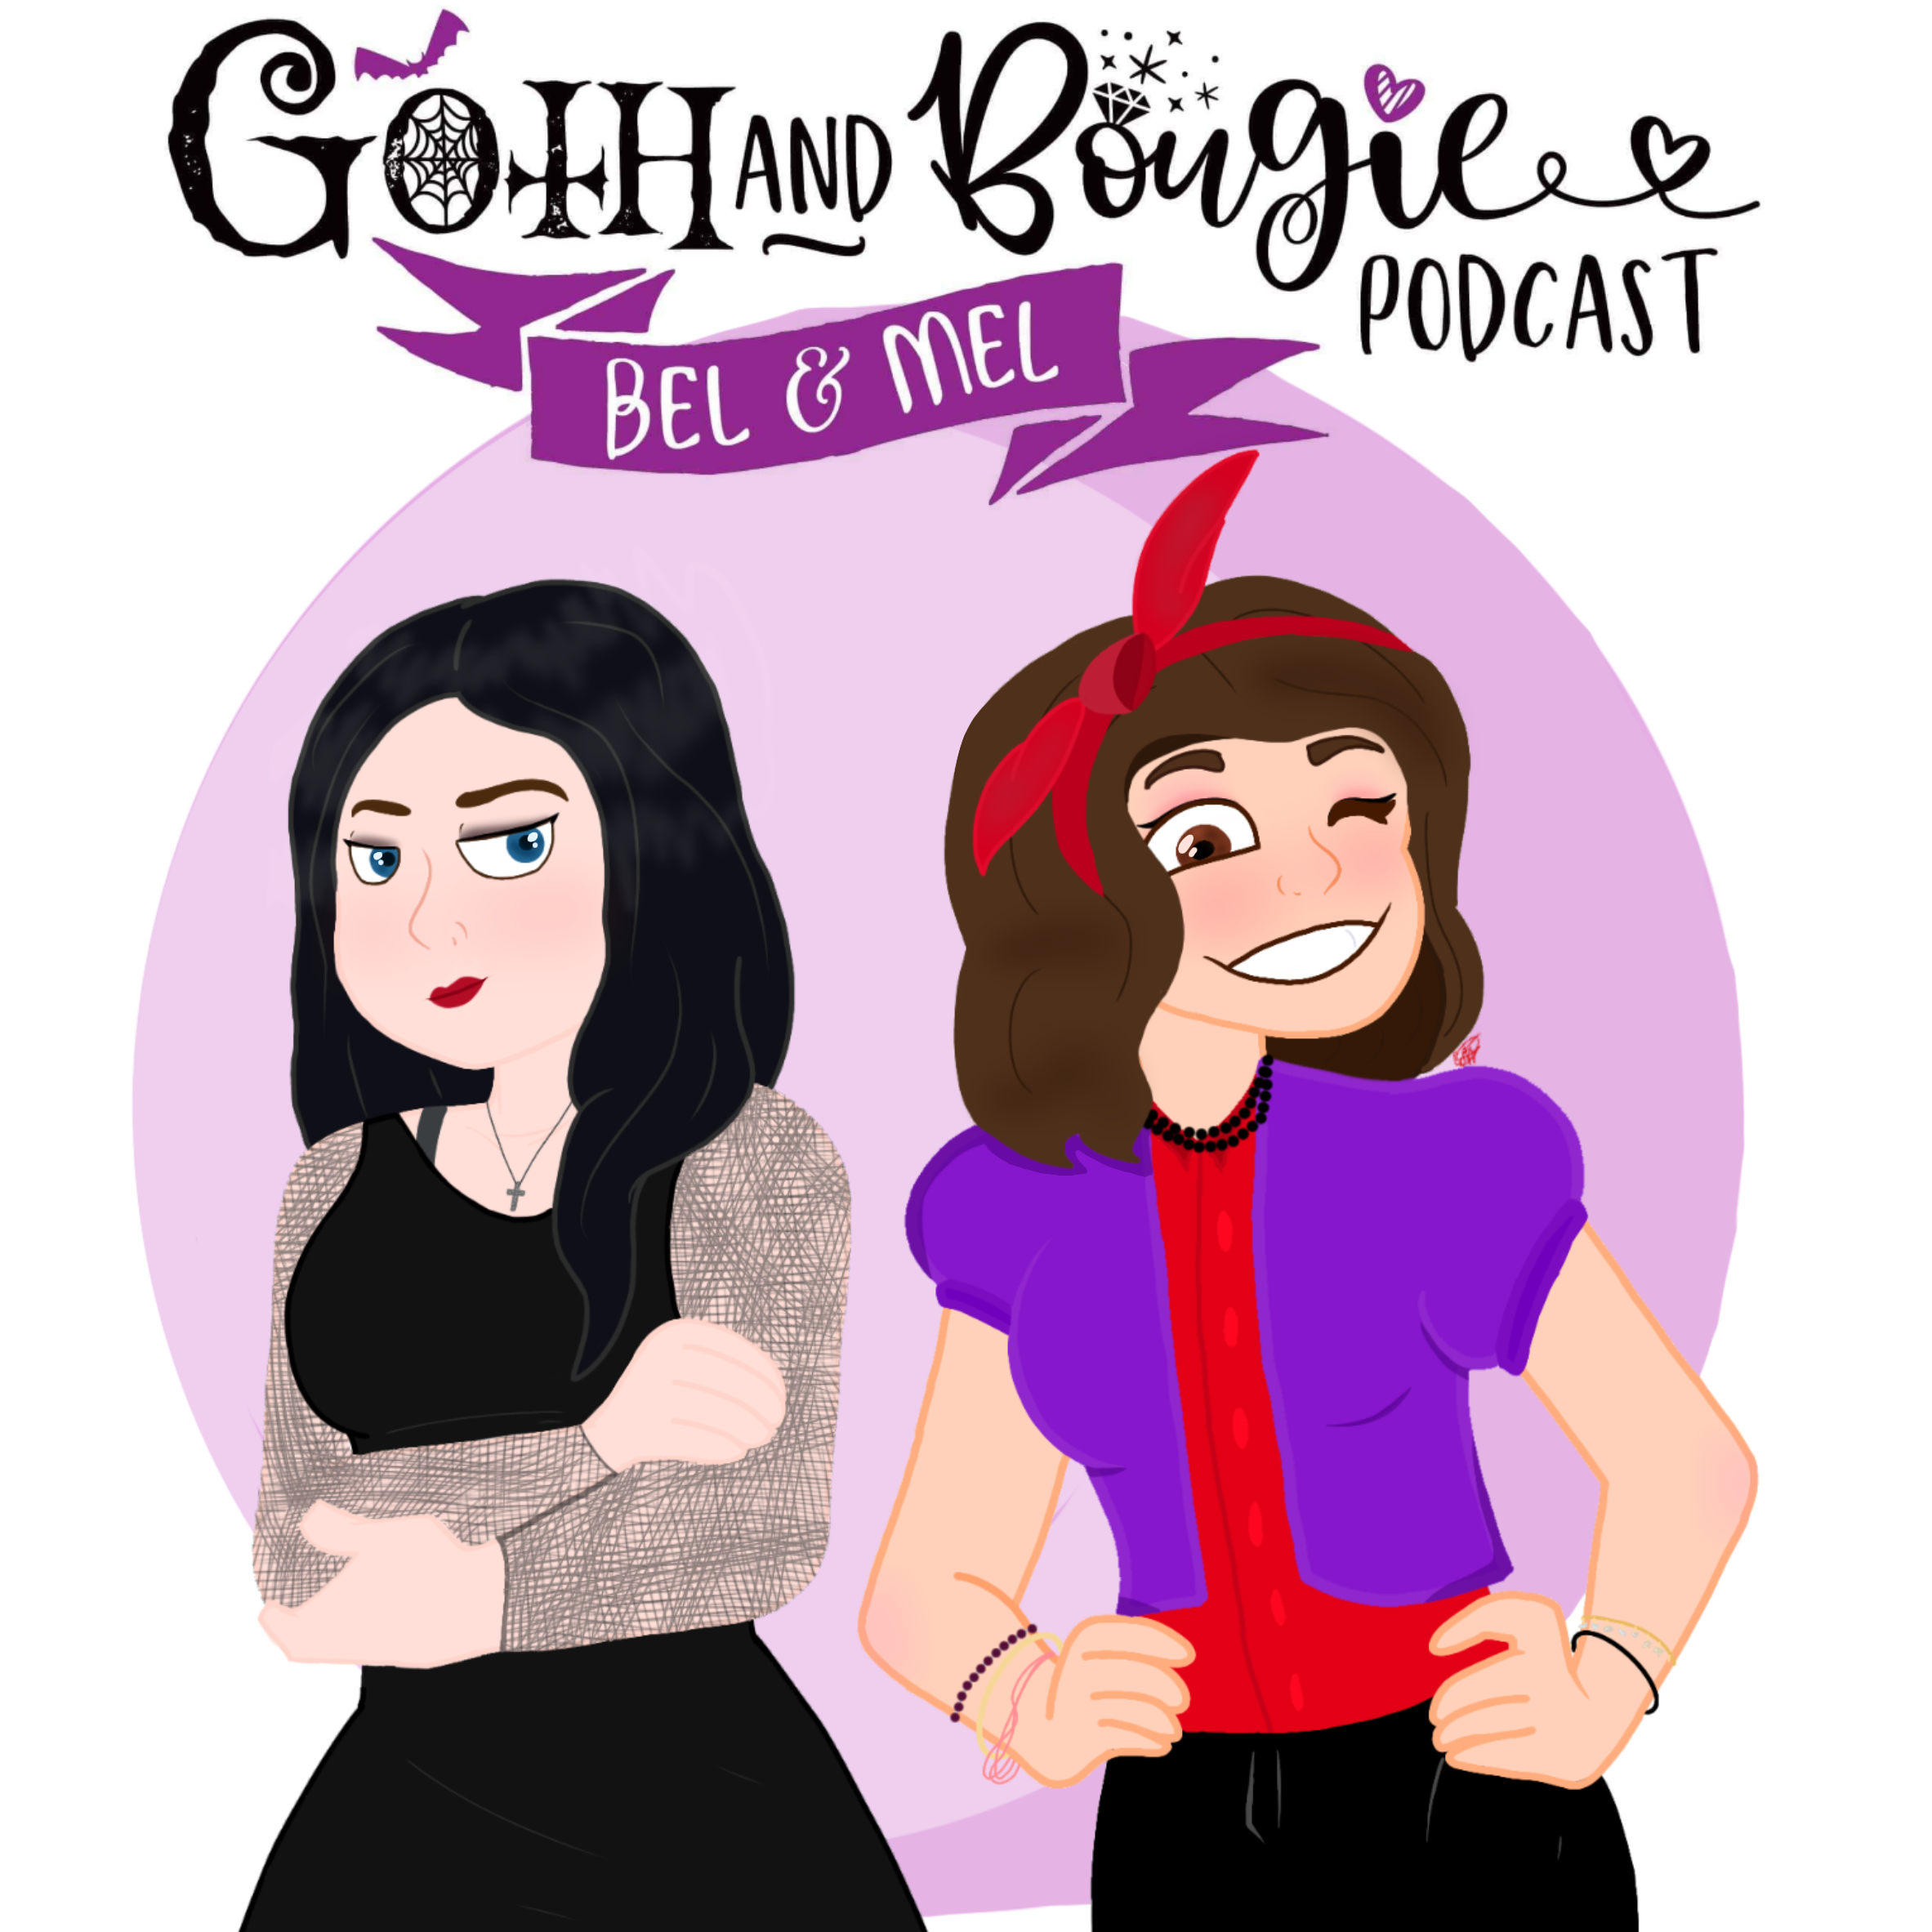 GOTH AND BOUGIE PODCAST